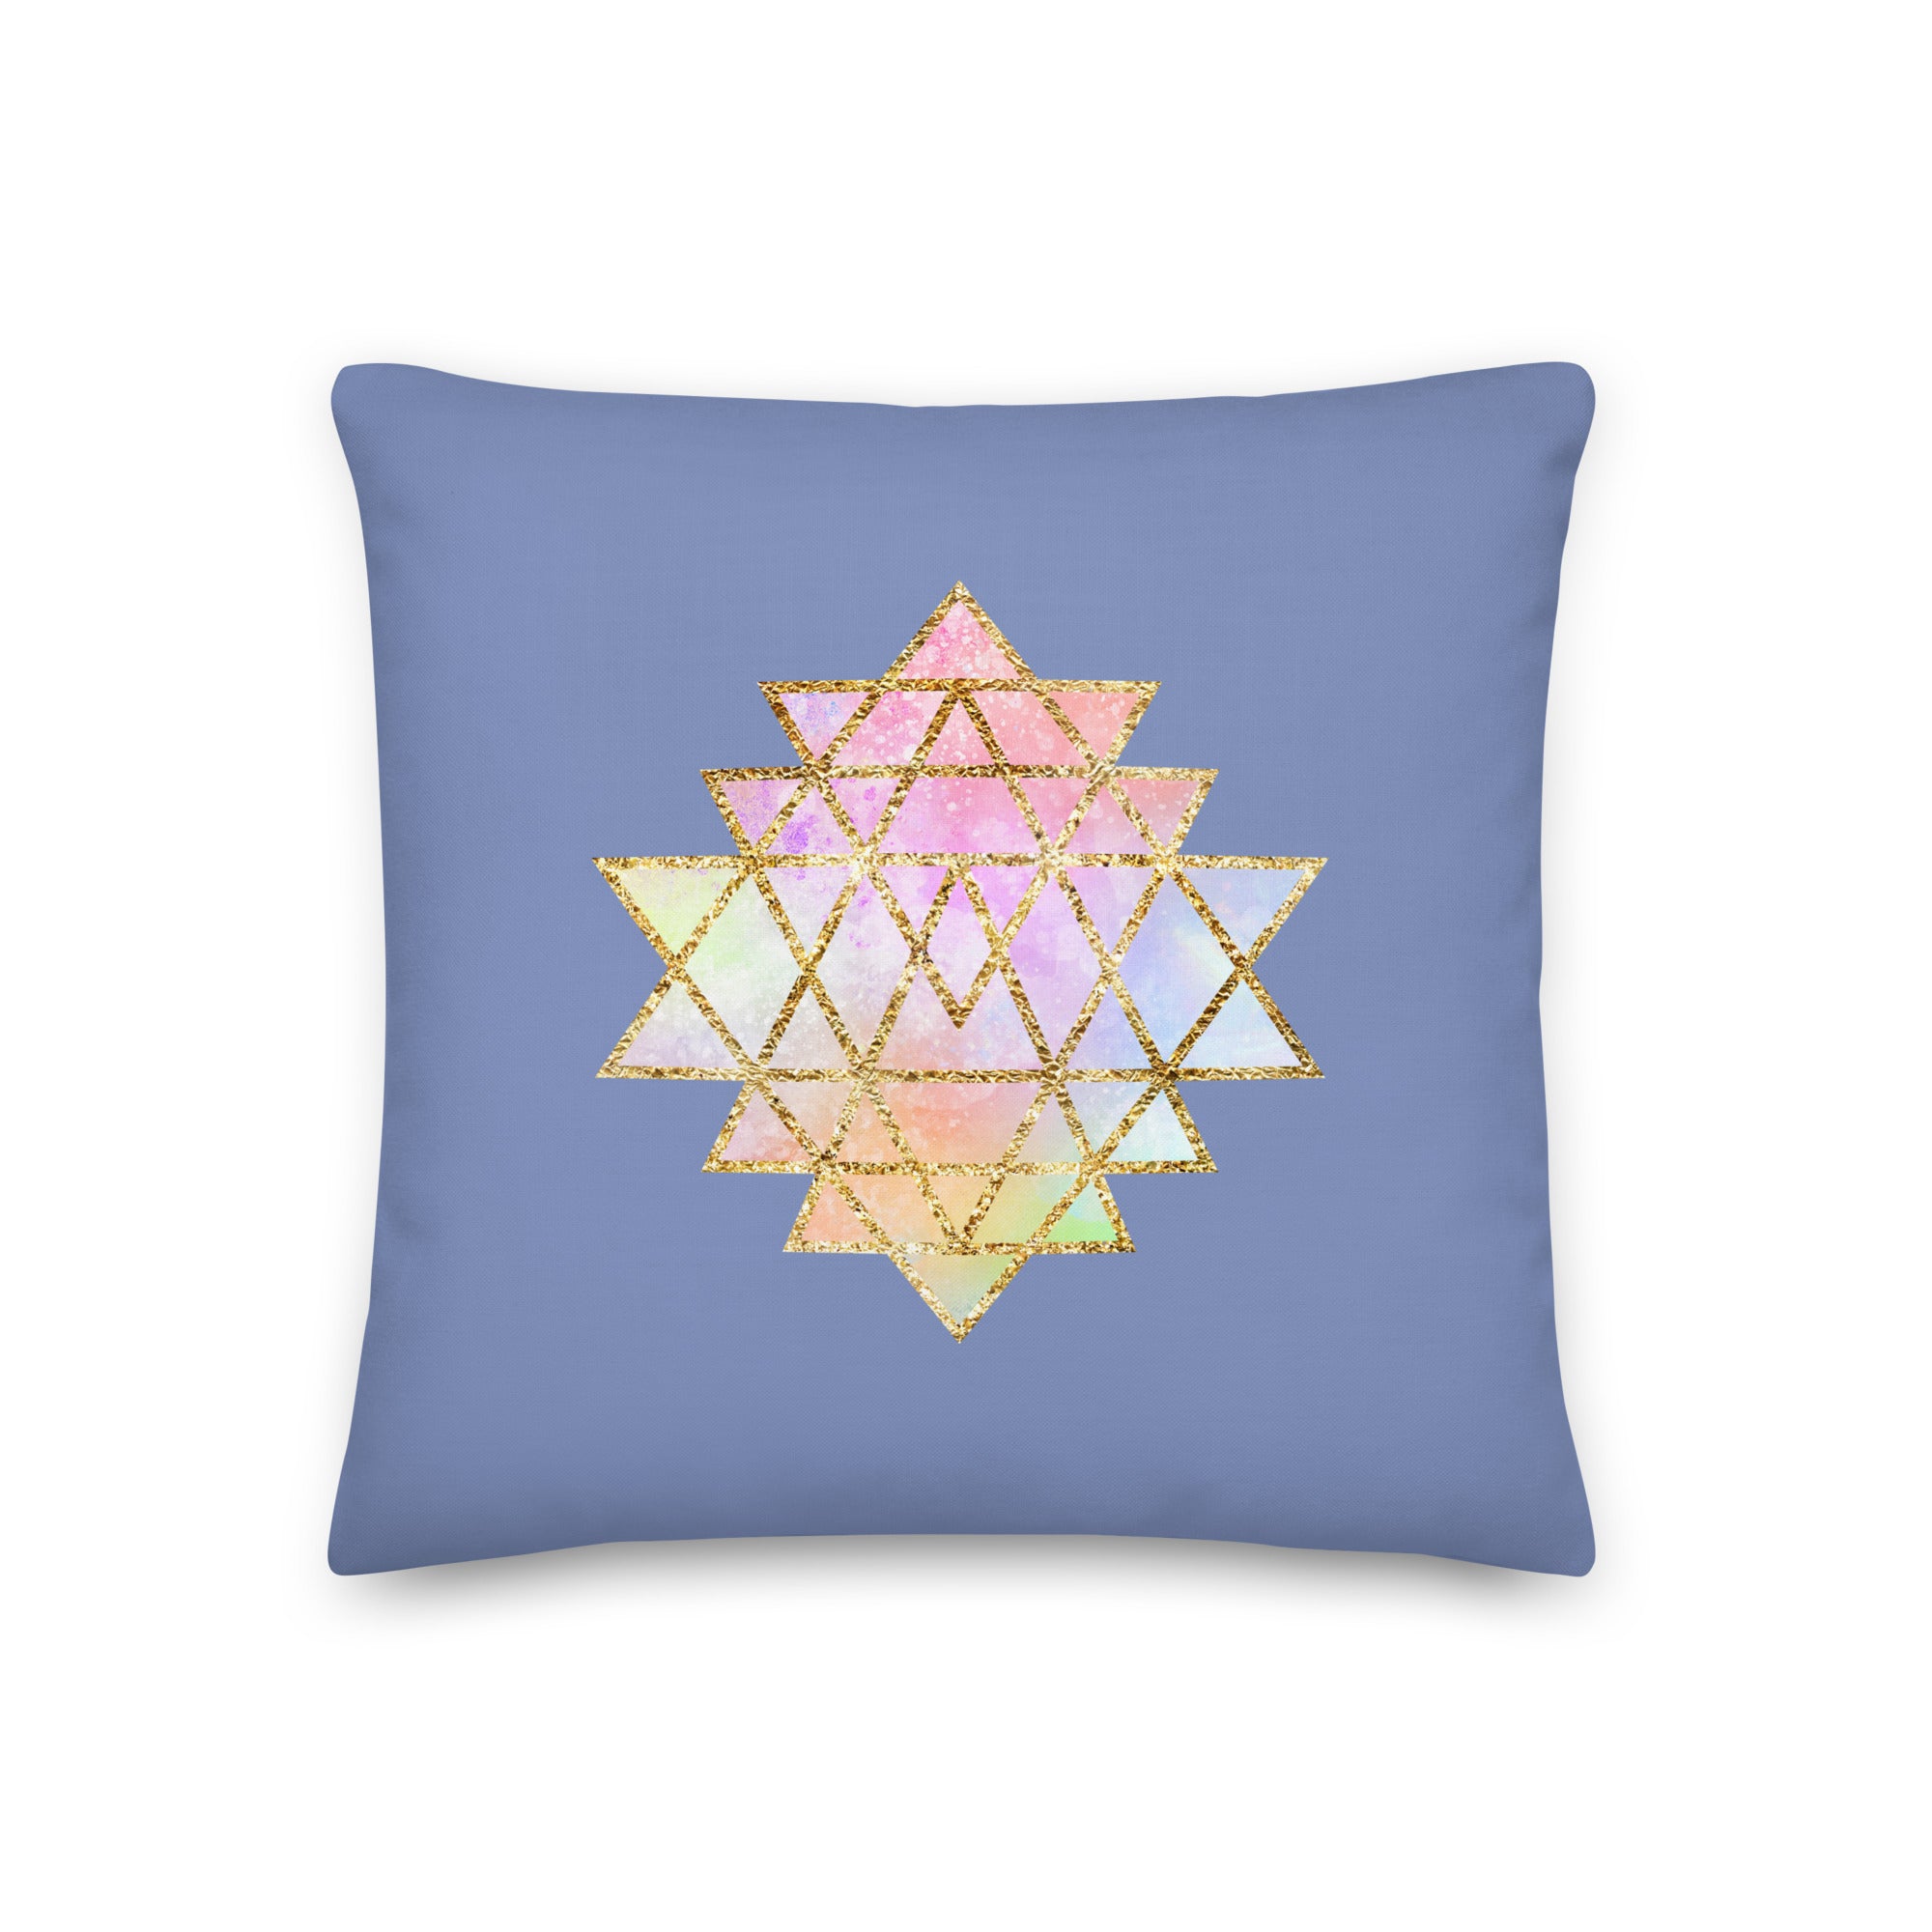 cosmic powers collection by goddess swag.  Throw pillow with Sri Yantra designs on front and back, colors of light pastels and gold on a solid blue color background.  This is the pillow insert and removable cover.